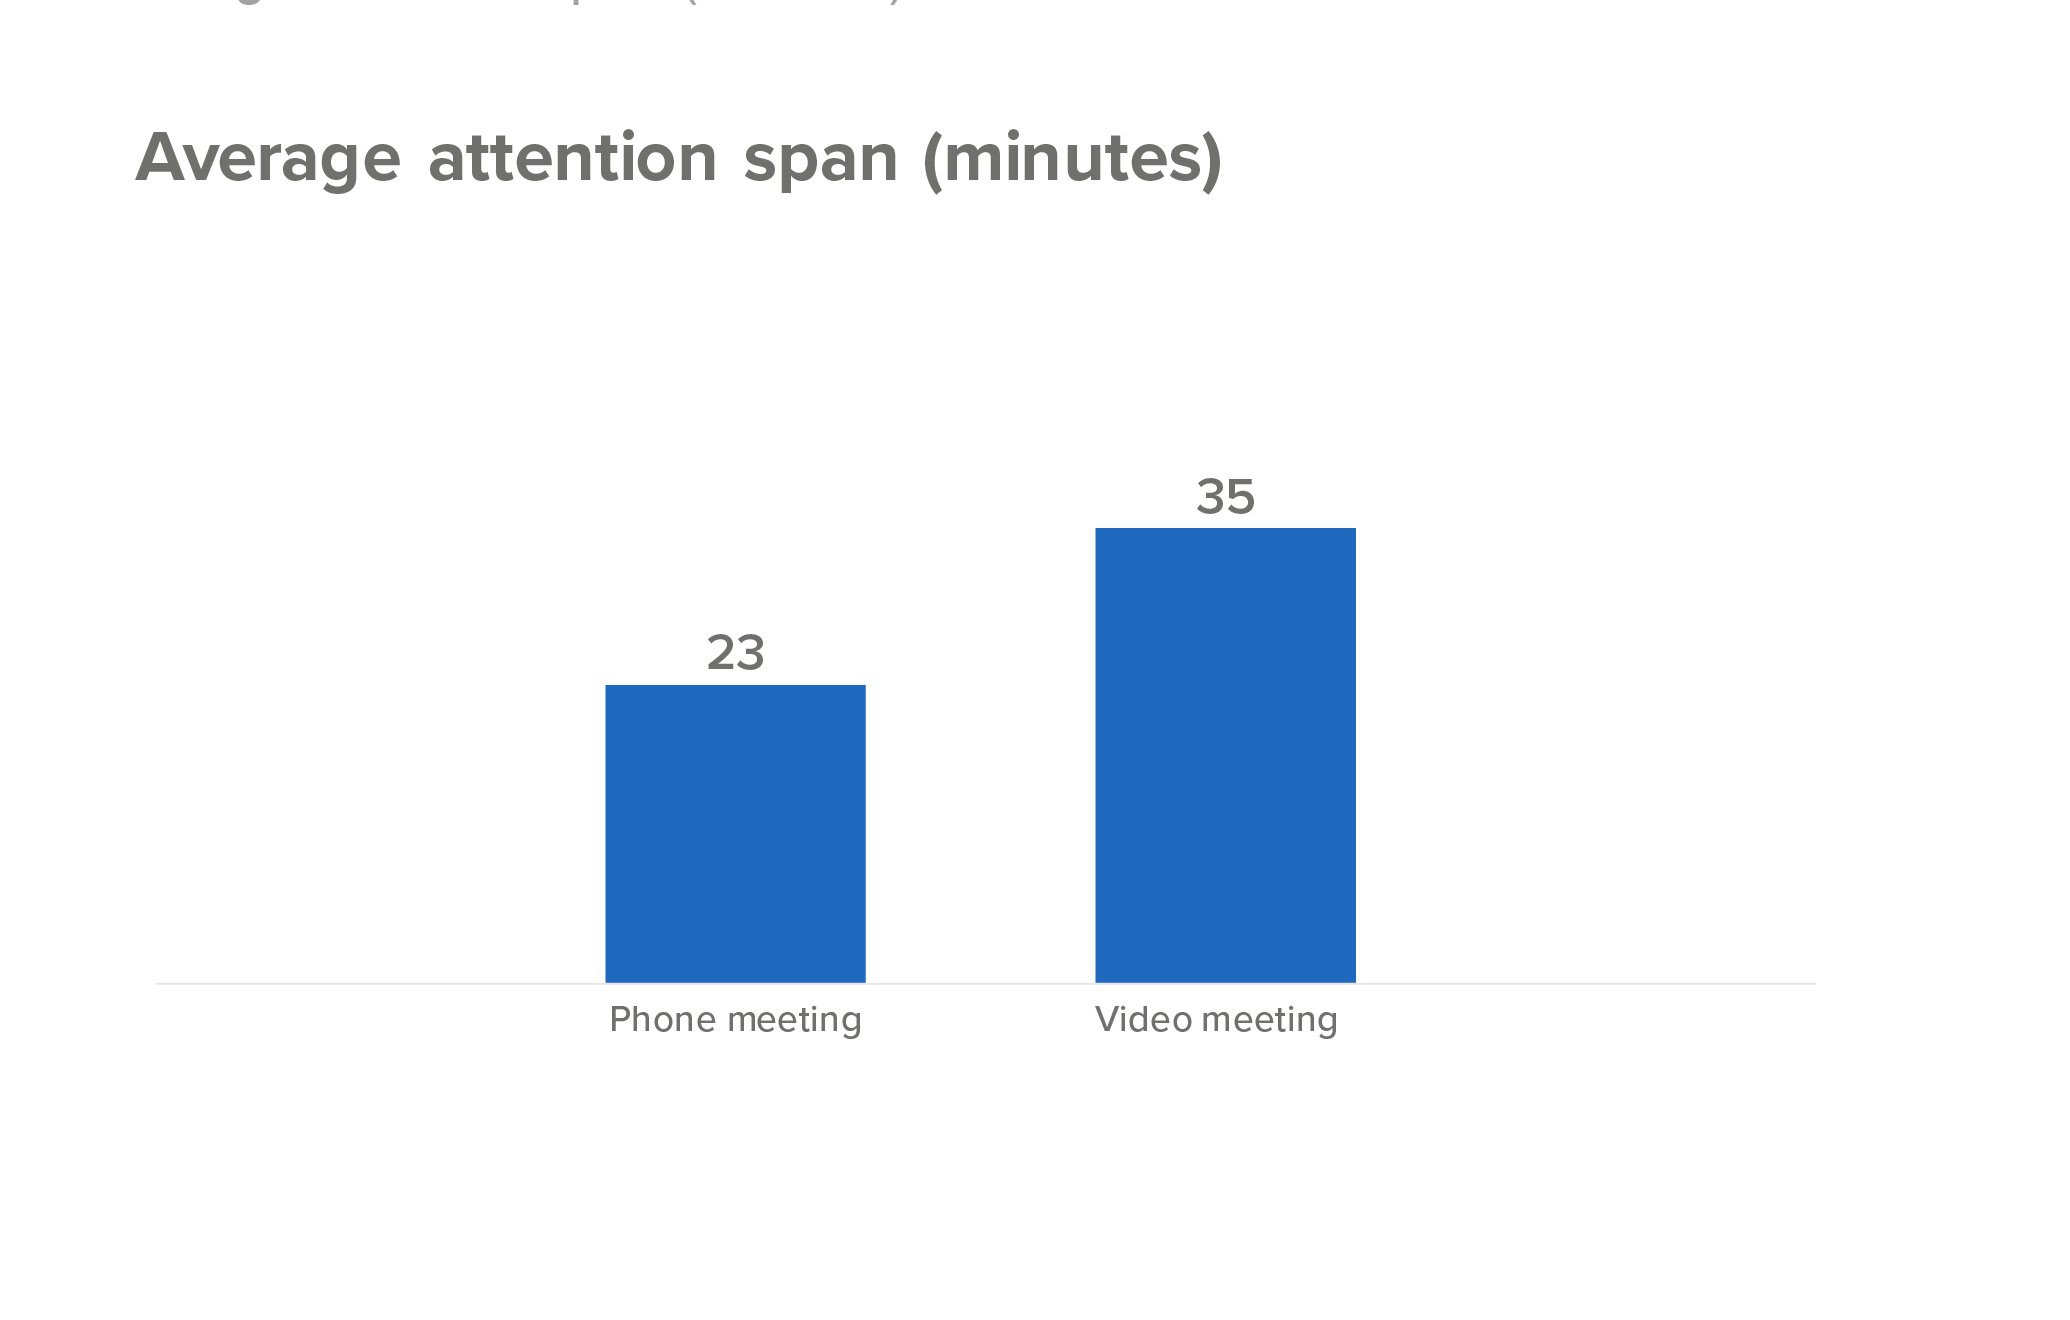 Average attention span on phone video calls